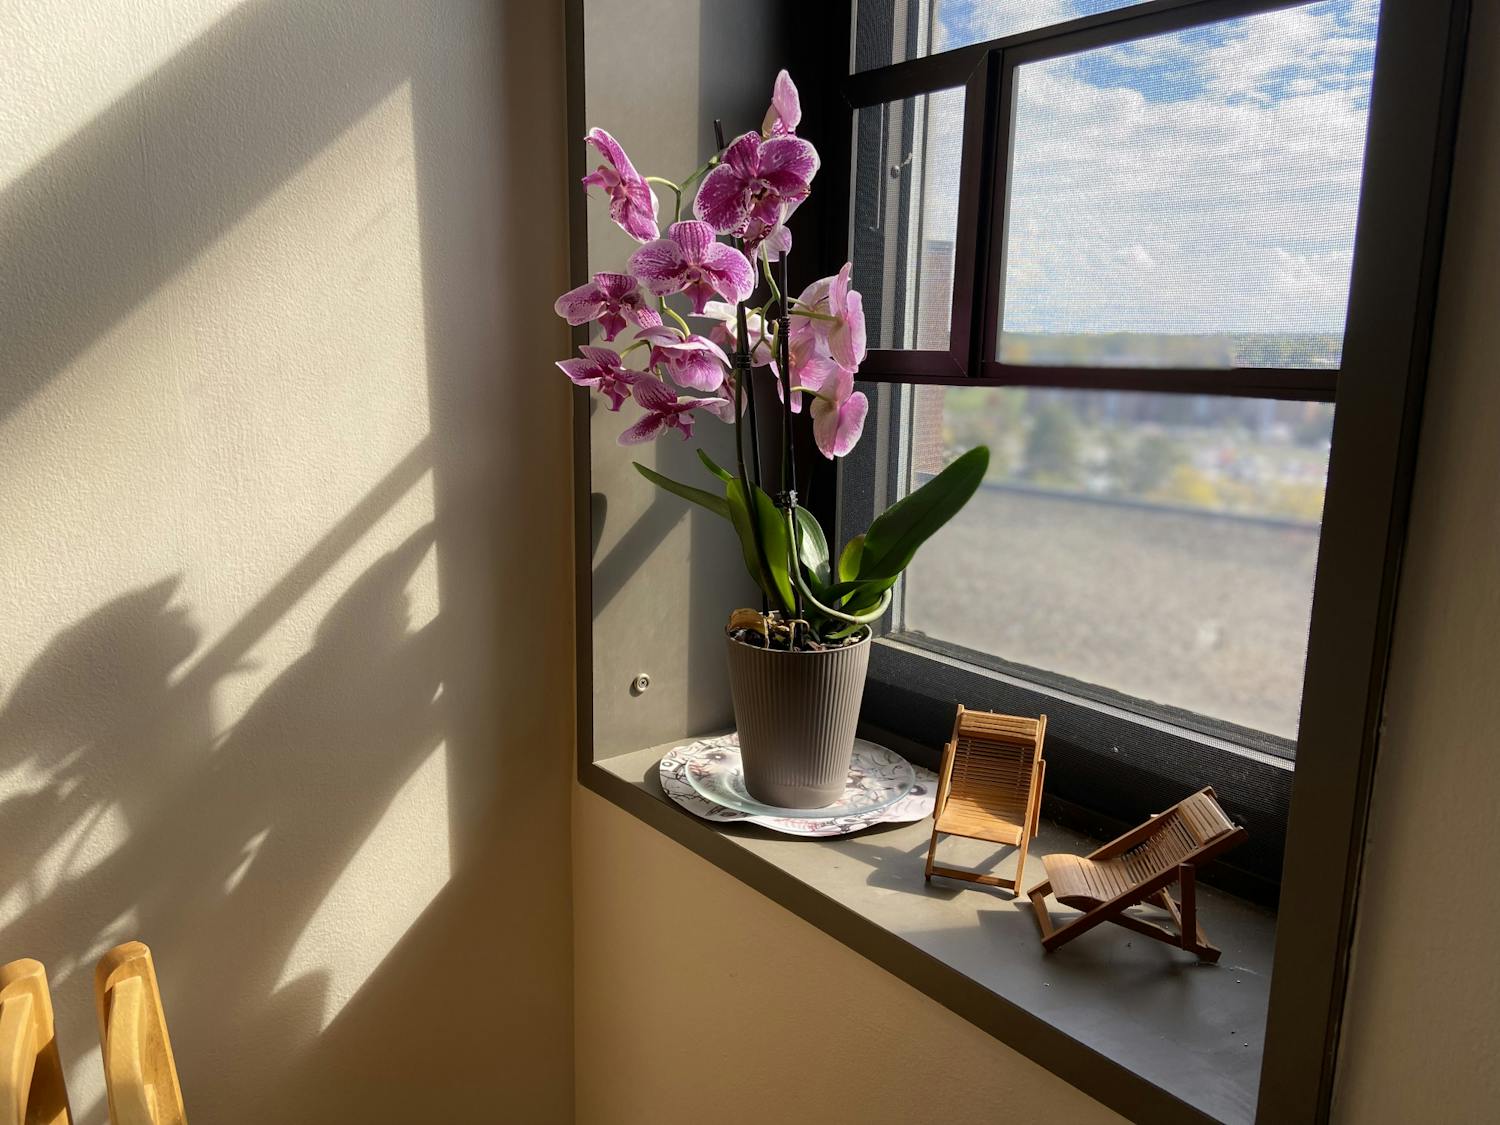 A pink orchid catches sunlight on the windowsill in history professor Kristin Stapleton's office.